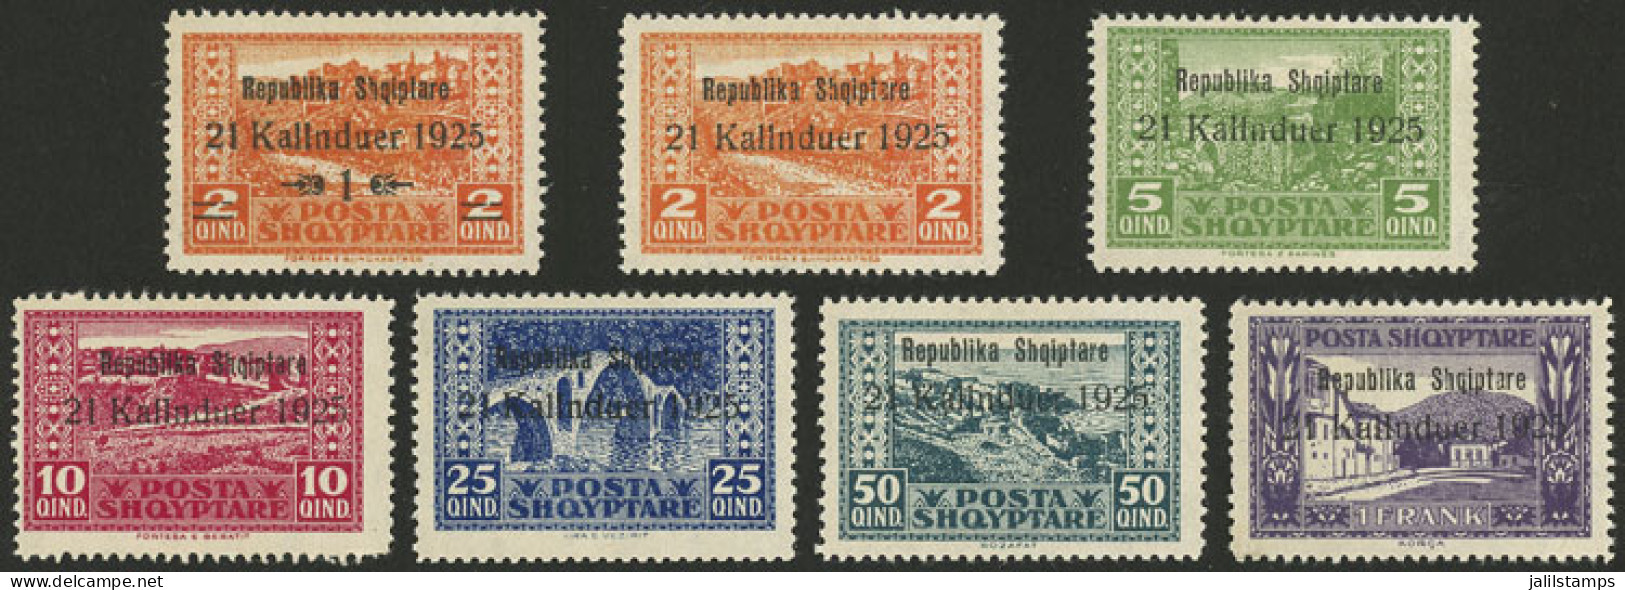 ALBANIA: Sc.171/177, 1925 Proclamation Of The Republic, Compl. Set Of 7 Overprinted Values, Very Fine Quality! - Albania